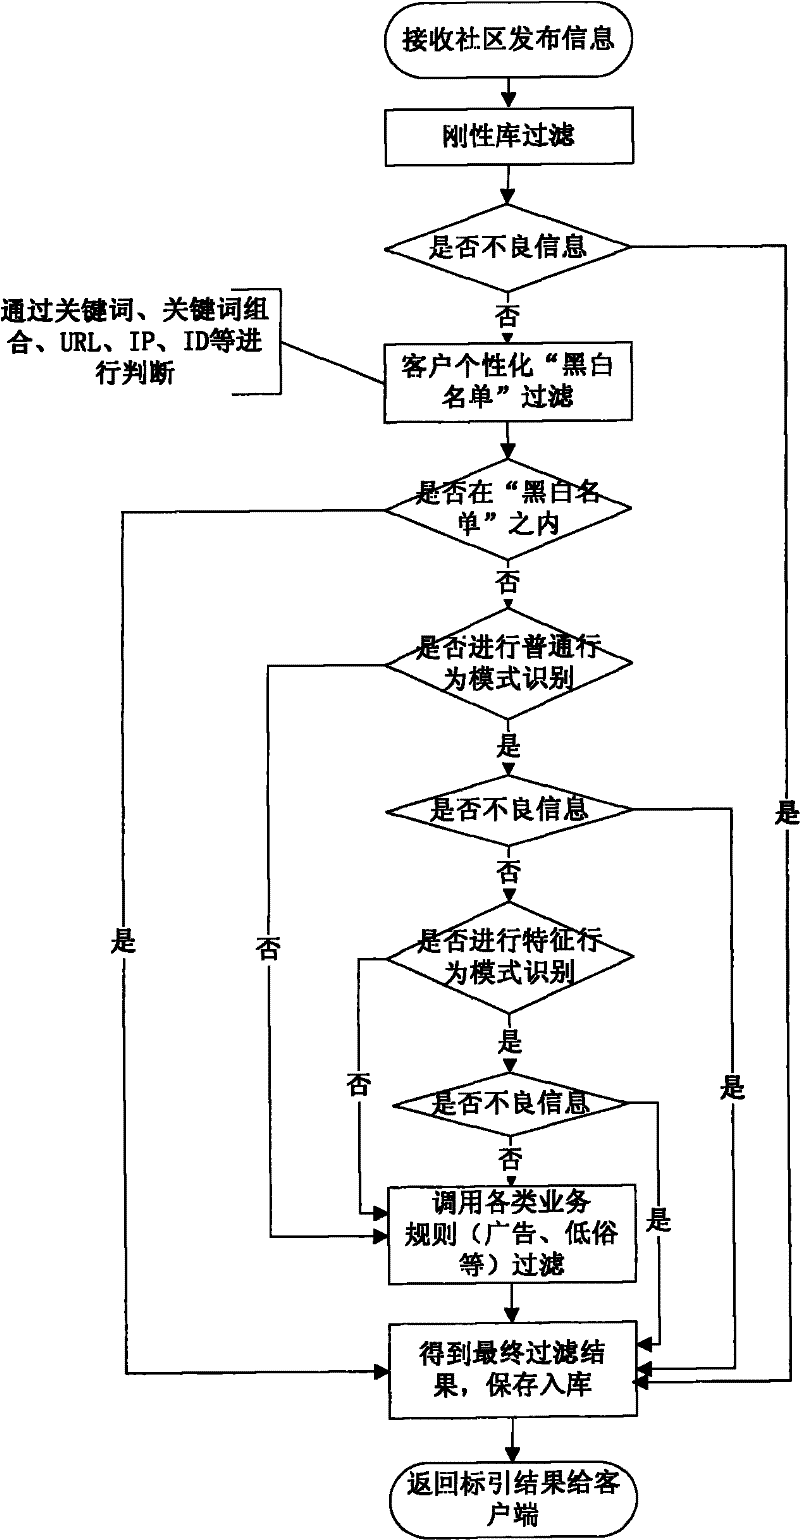 Internet-facing filtration system of unhealthy information and method thereof